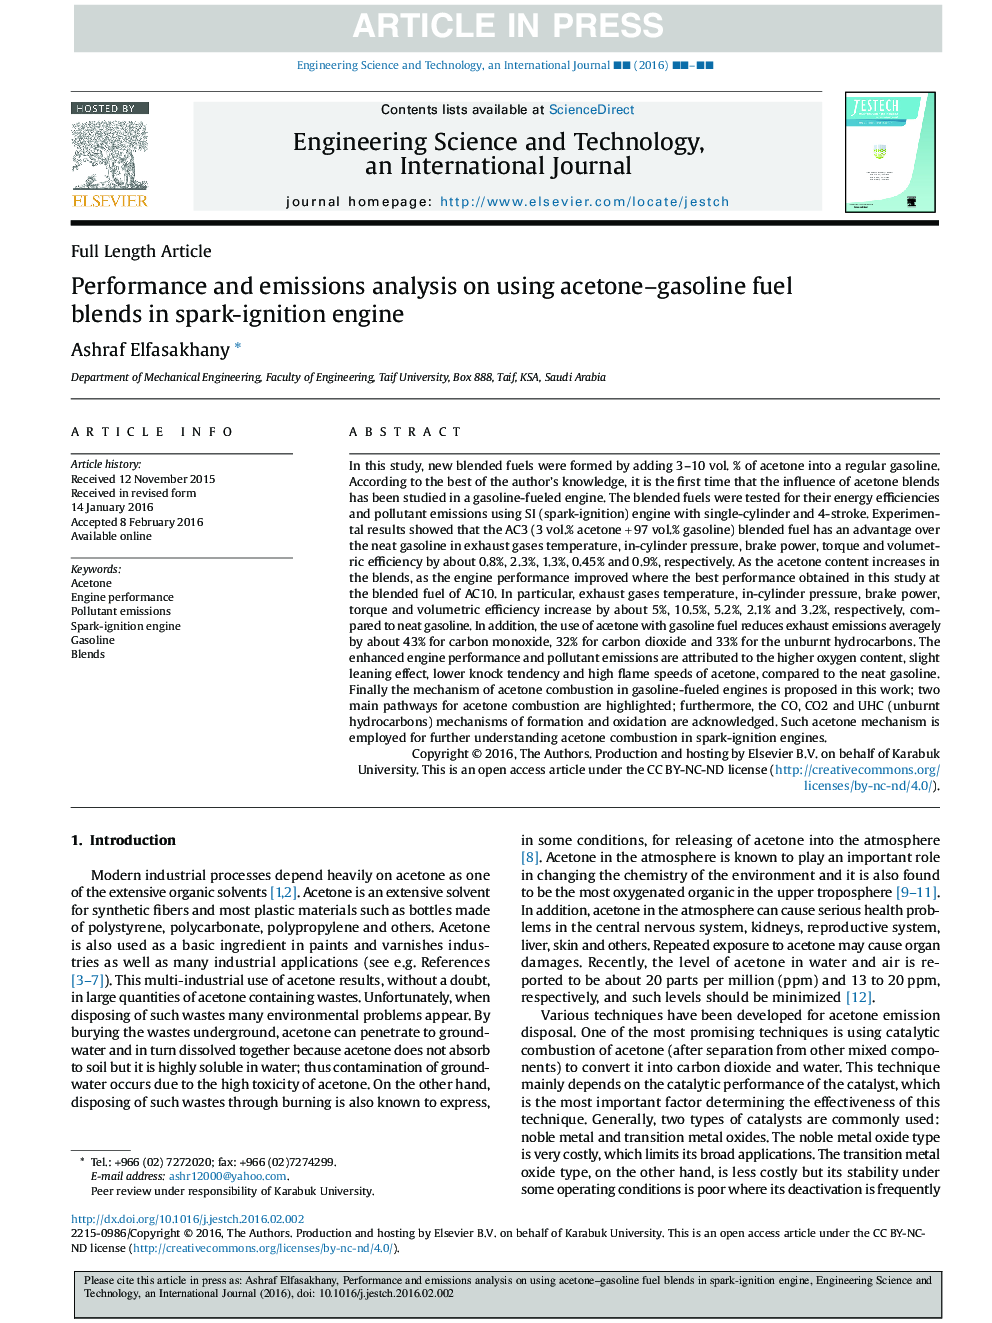 Performance and emissions analysis on using acetone-gasoline fuel blends in spark-ignition engine